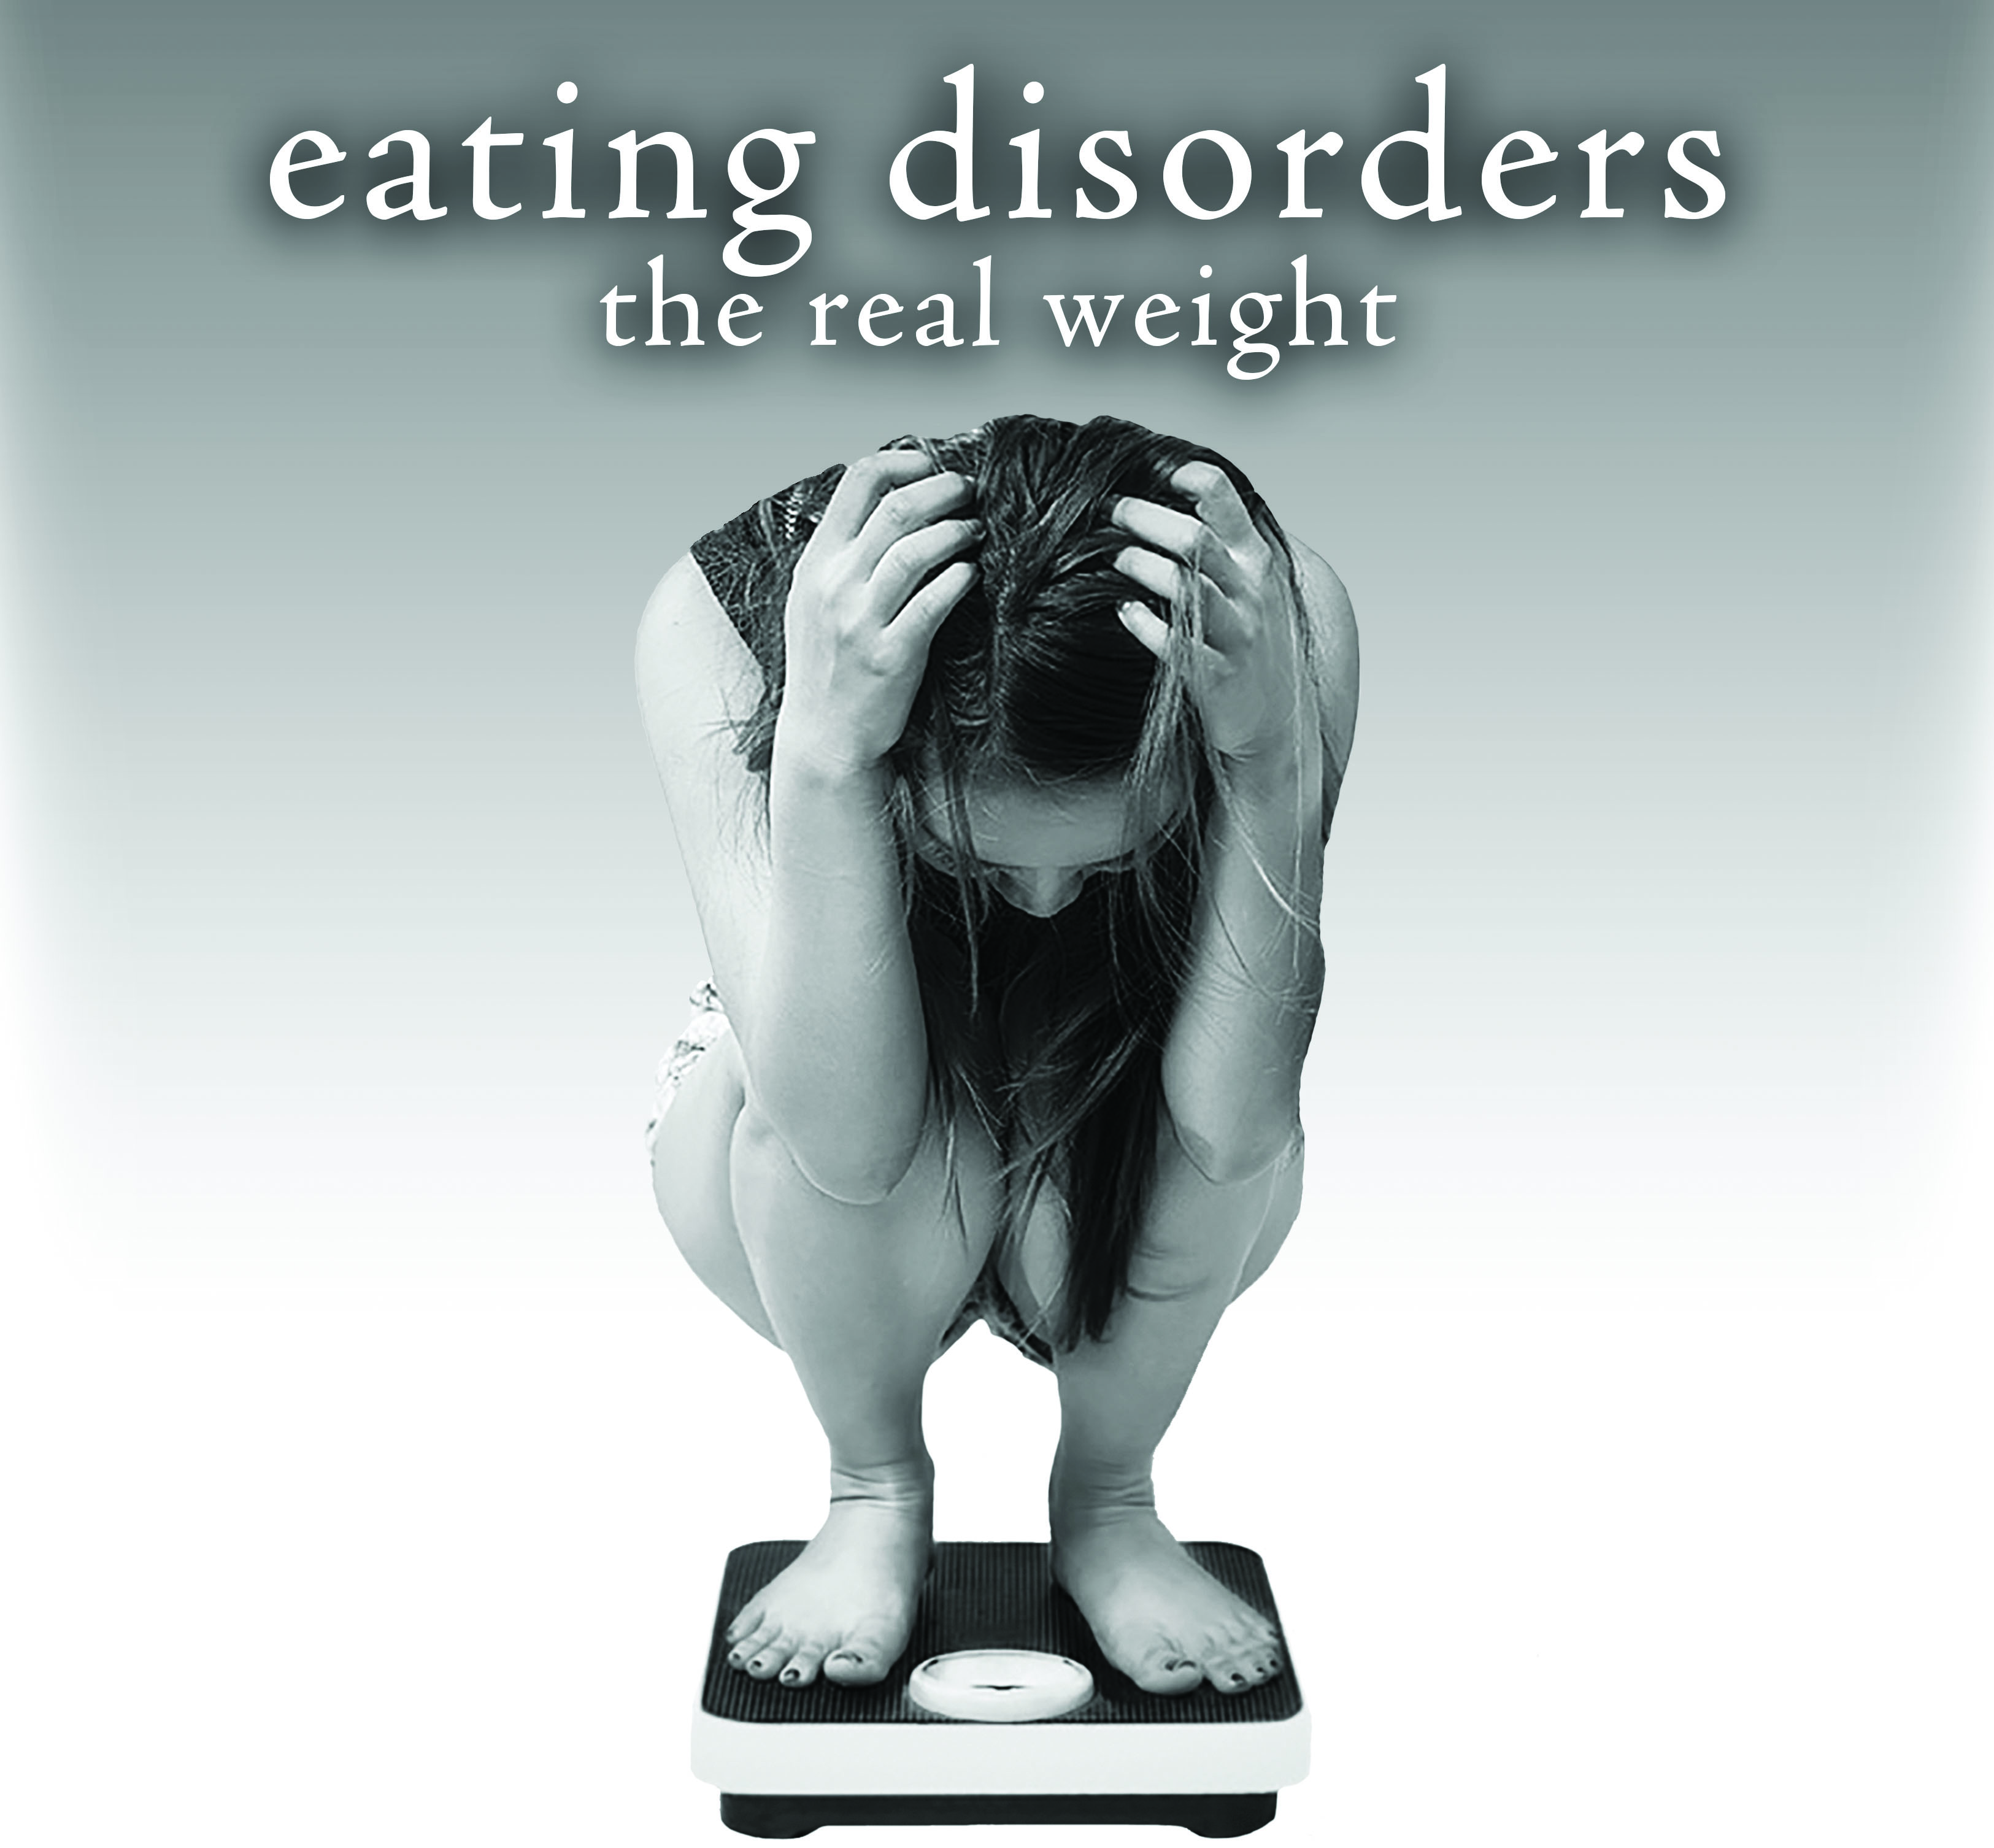 The Real Weight of Eating Disorders